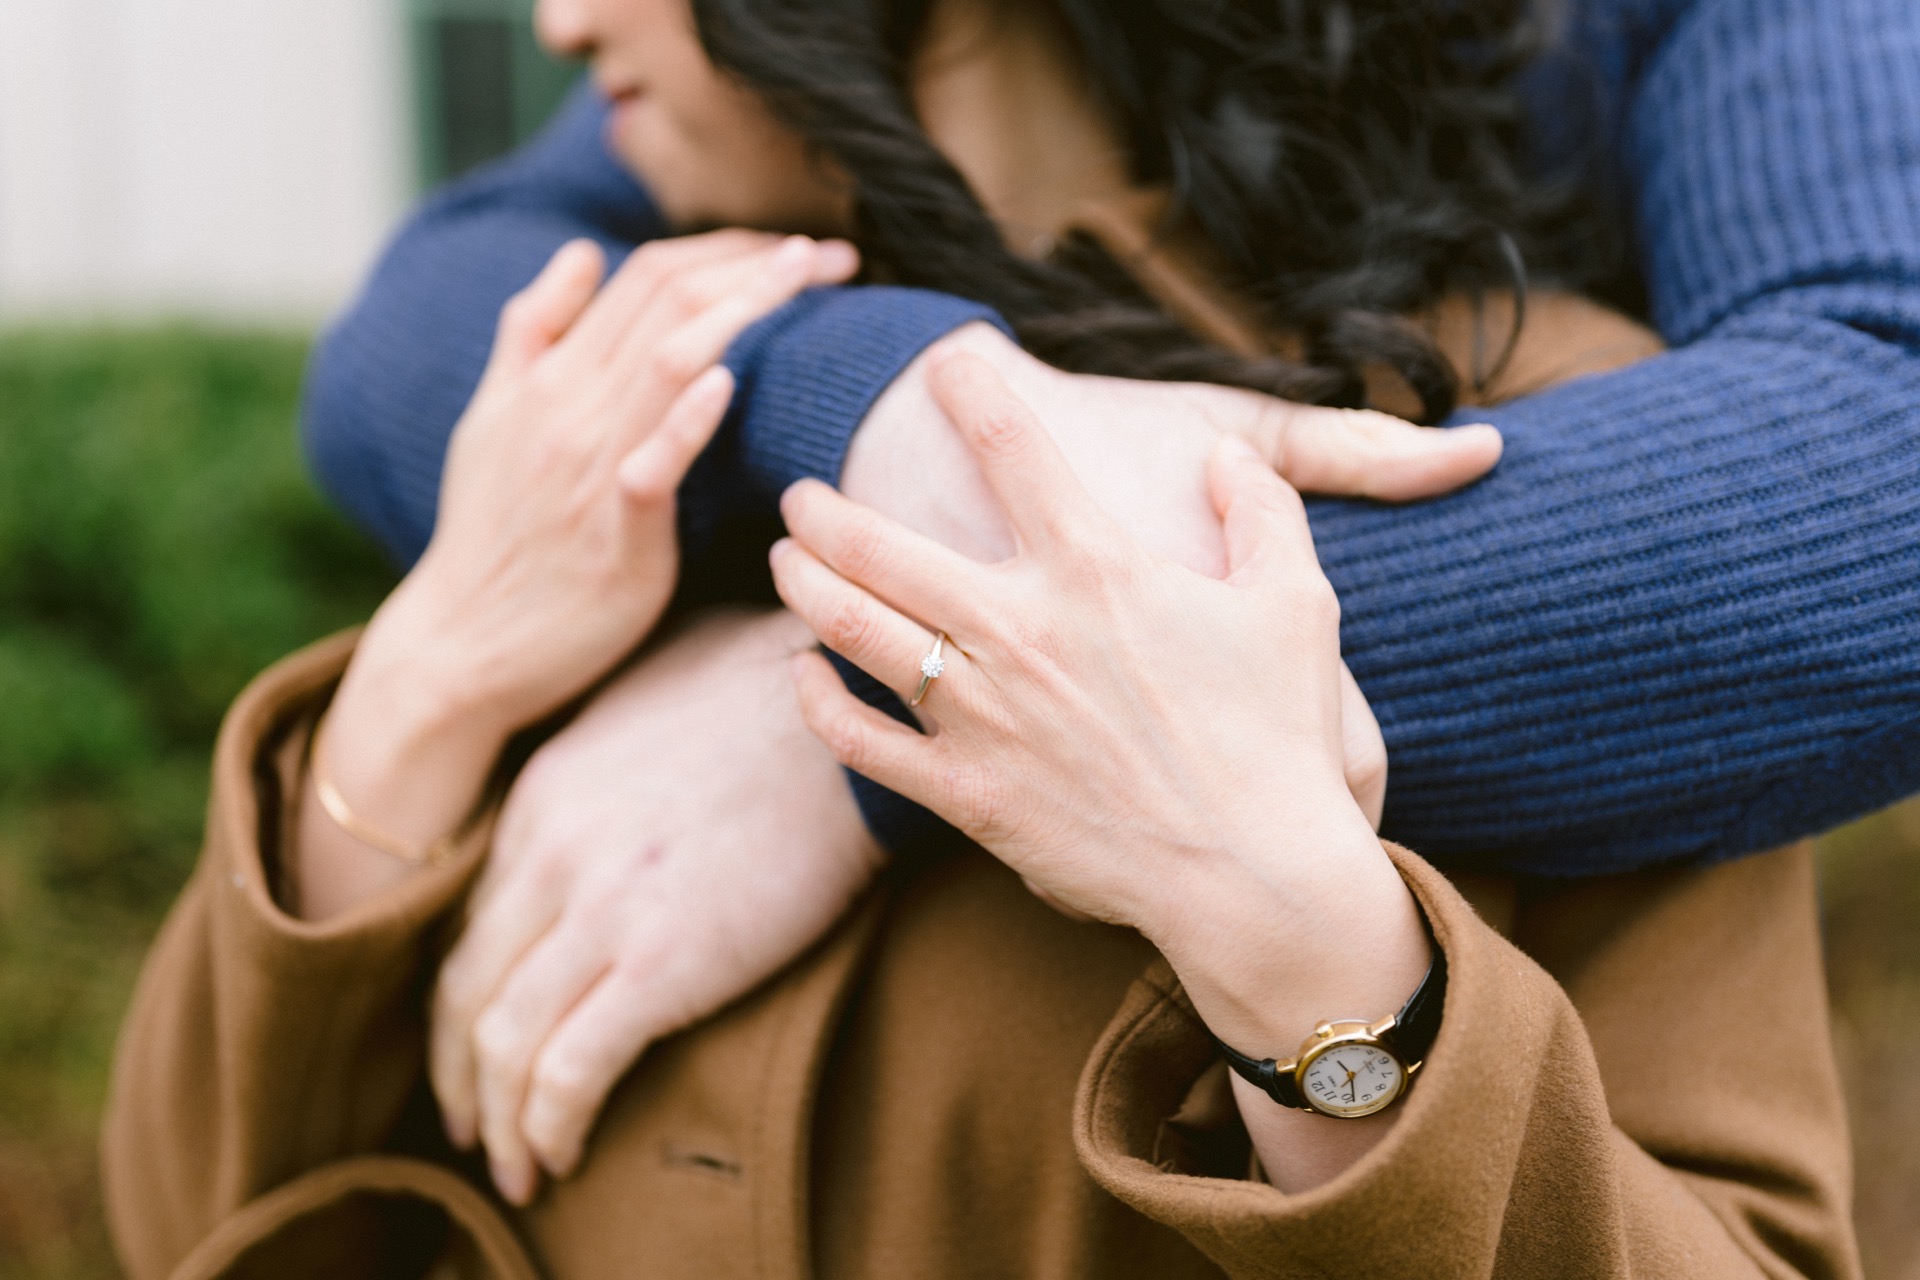 A couple showcasing engagement rings while standing close to each other with a blurred background.